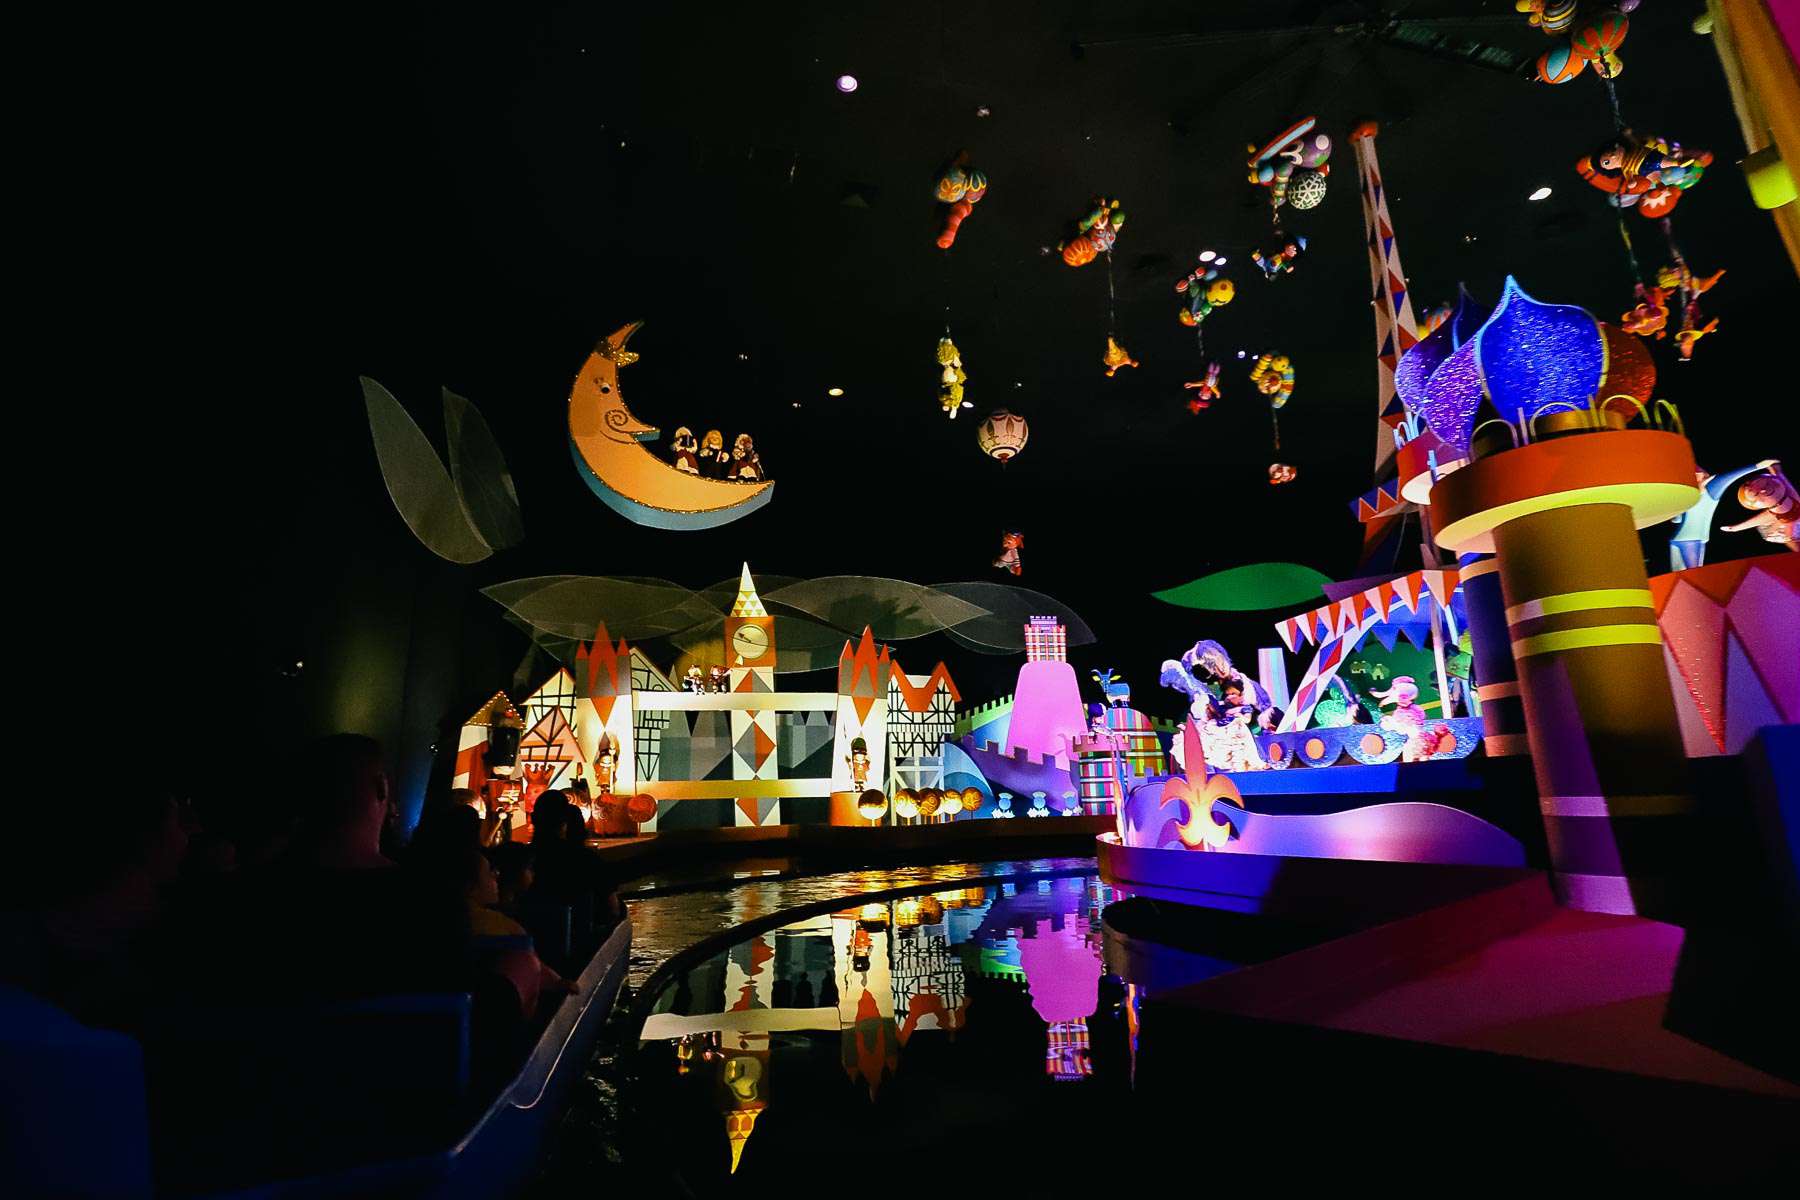 "it's a small world" moon scene with dolls hanging overhead. 